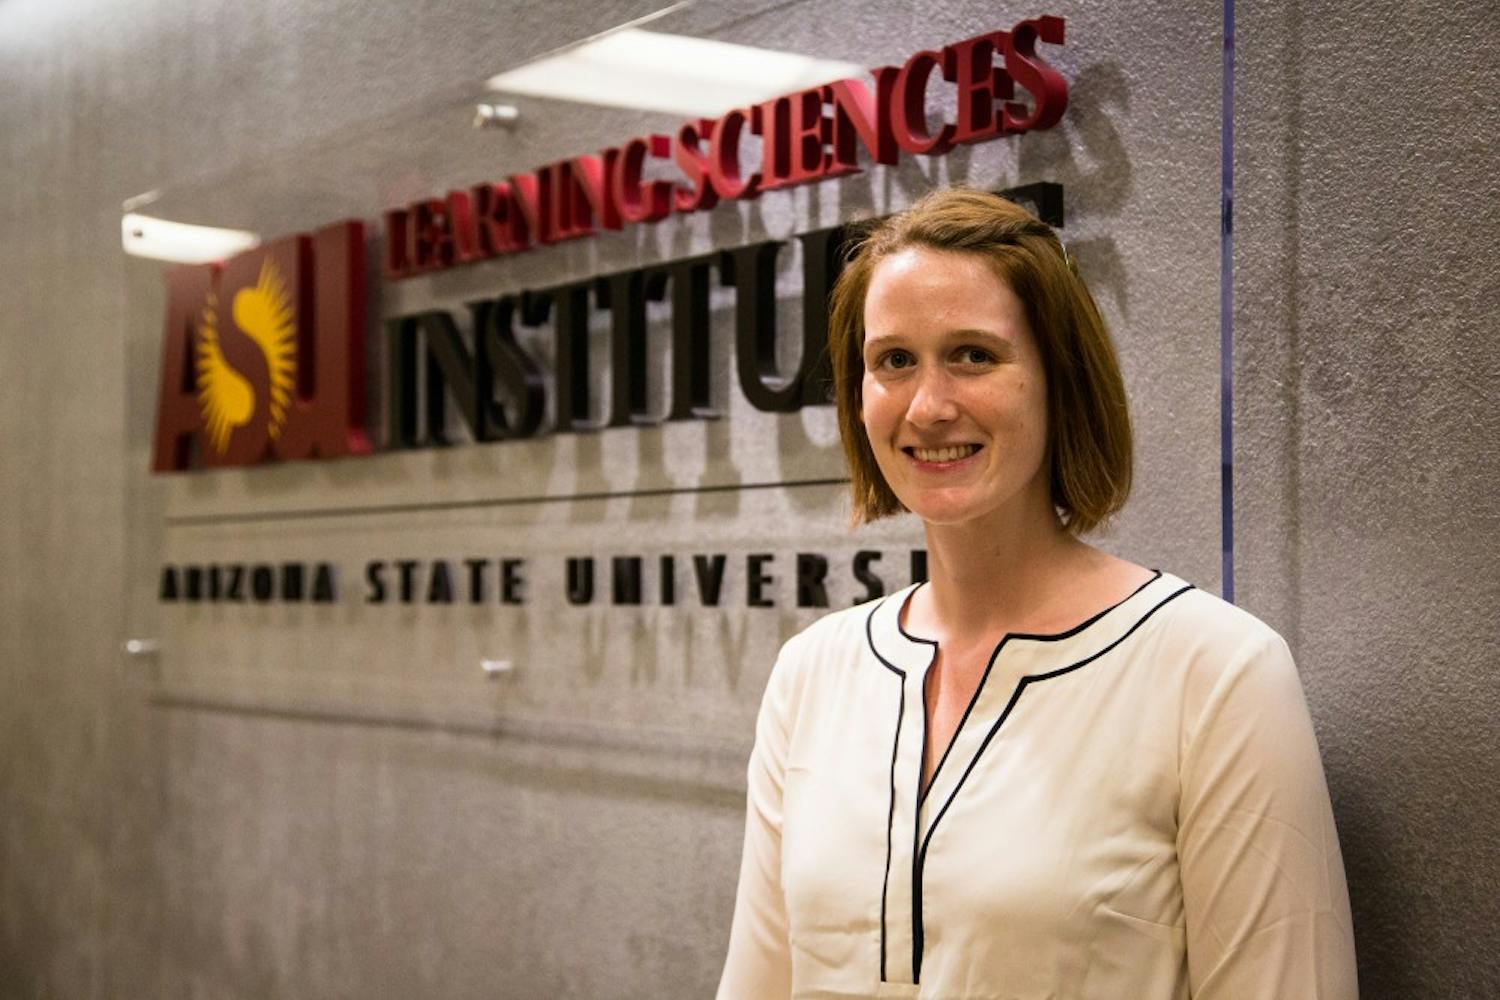 ASU psychology doctoral student Leigh McLean outside of her office in the Ira D. Payne Educational Hall on the Tempe campus on Feb. 24, 2015. McLean’s psychology study revealed depression in teachers impacts the classroom learning environment. (Daniel Kwon/ The State Press)